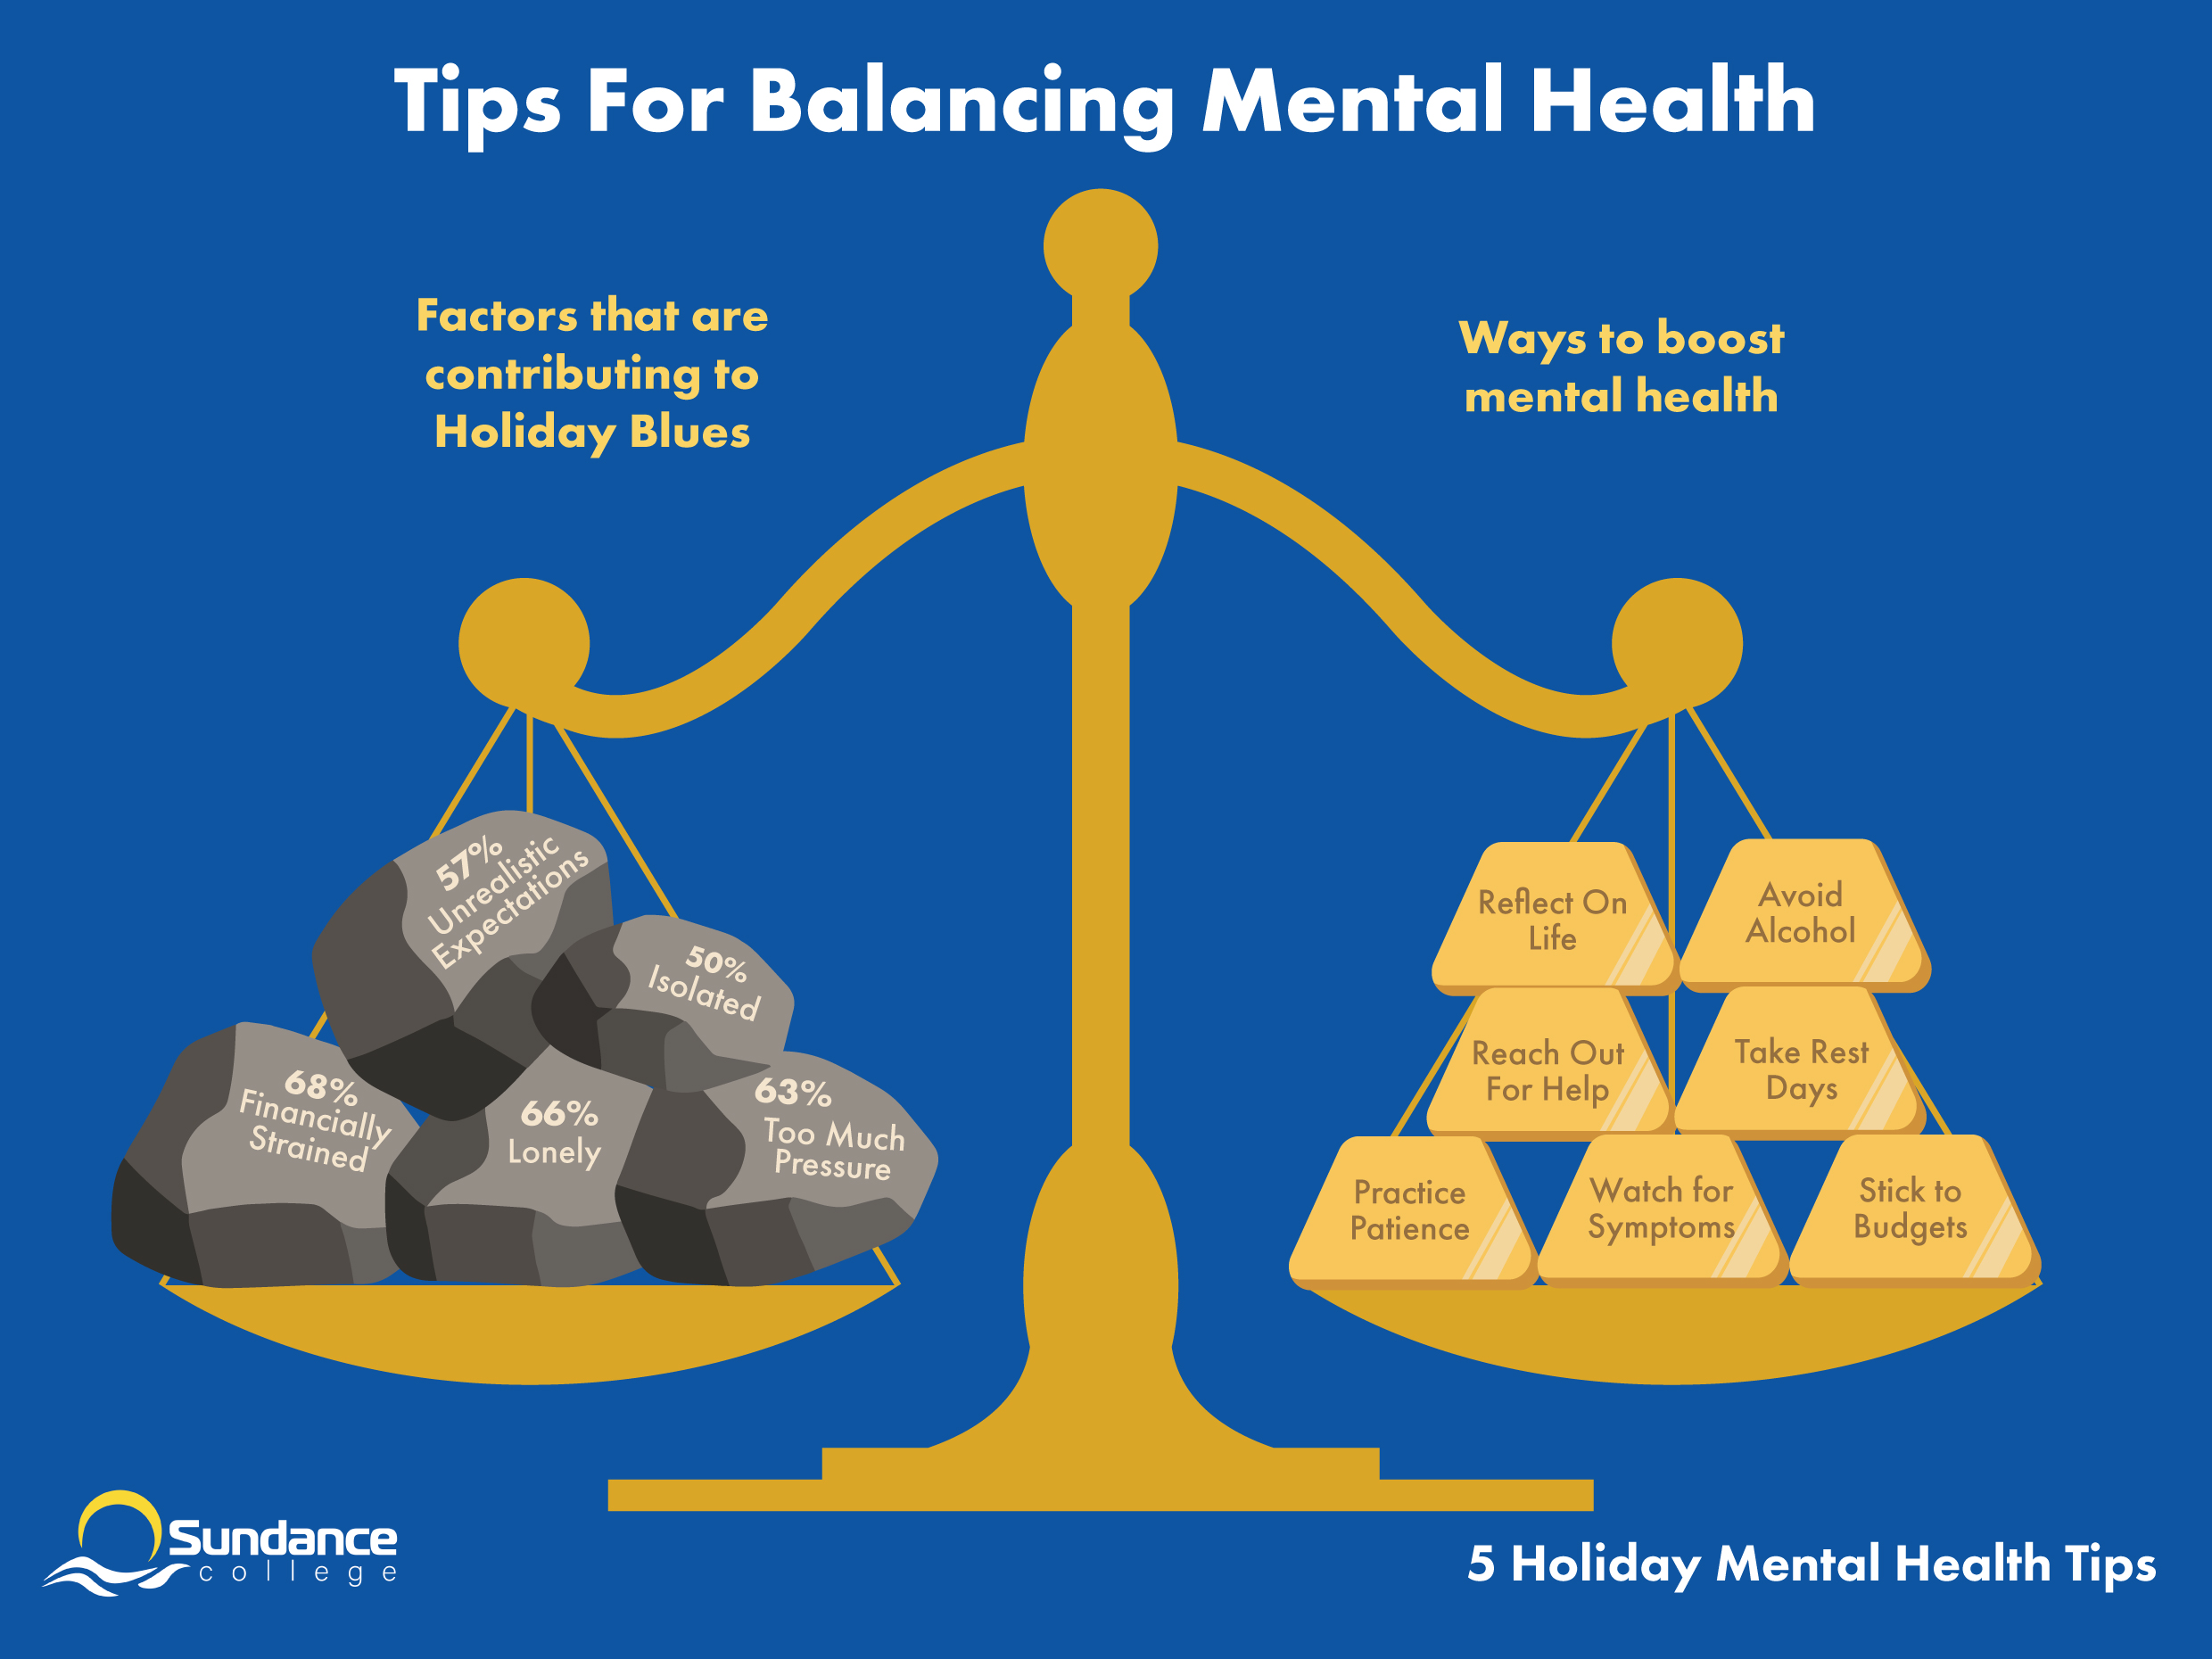 infographic depicting a gold scale, with factors contributing to holiday blues including feelings of loneliness, unrealistic expectations, financial strain, excessive pressure, and isolation; balanced by ways to boost mental health; including reflecting on life, reaching out for help, practicing patience, rest days, watching for symptoms, sticking to budgets, and avoiding alcohol.